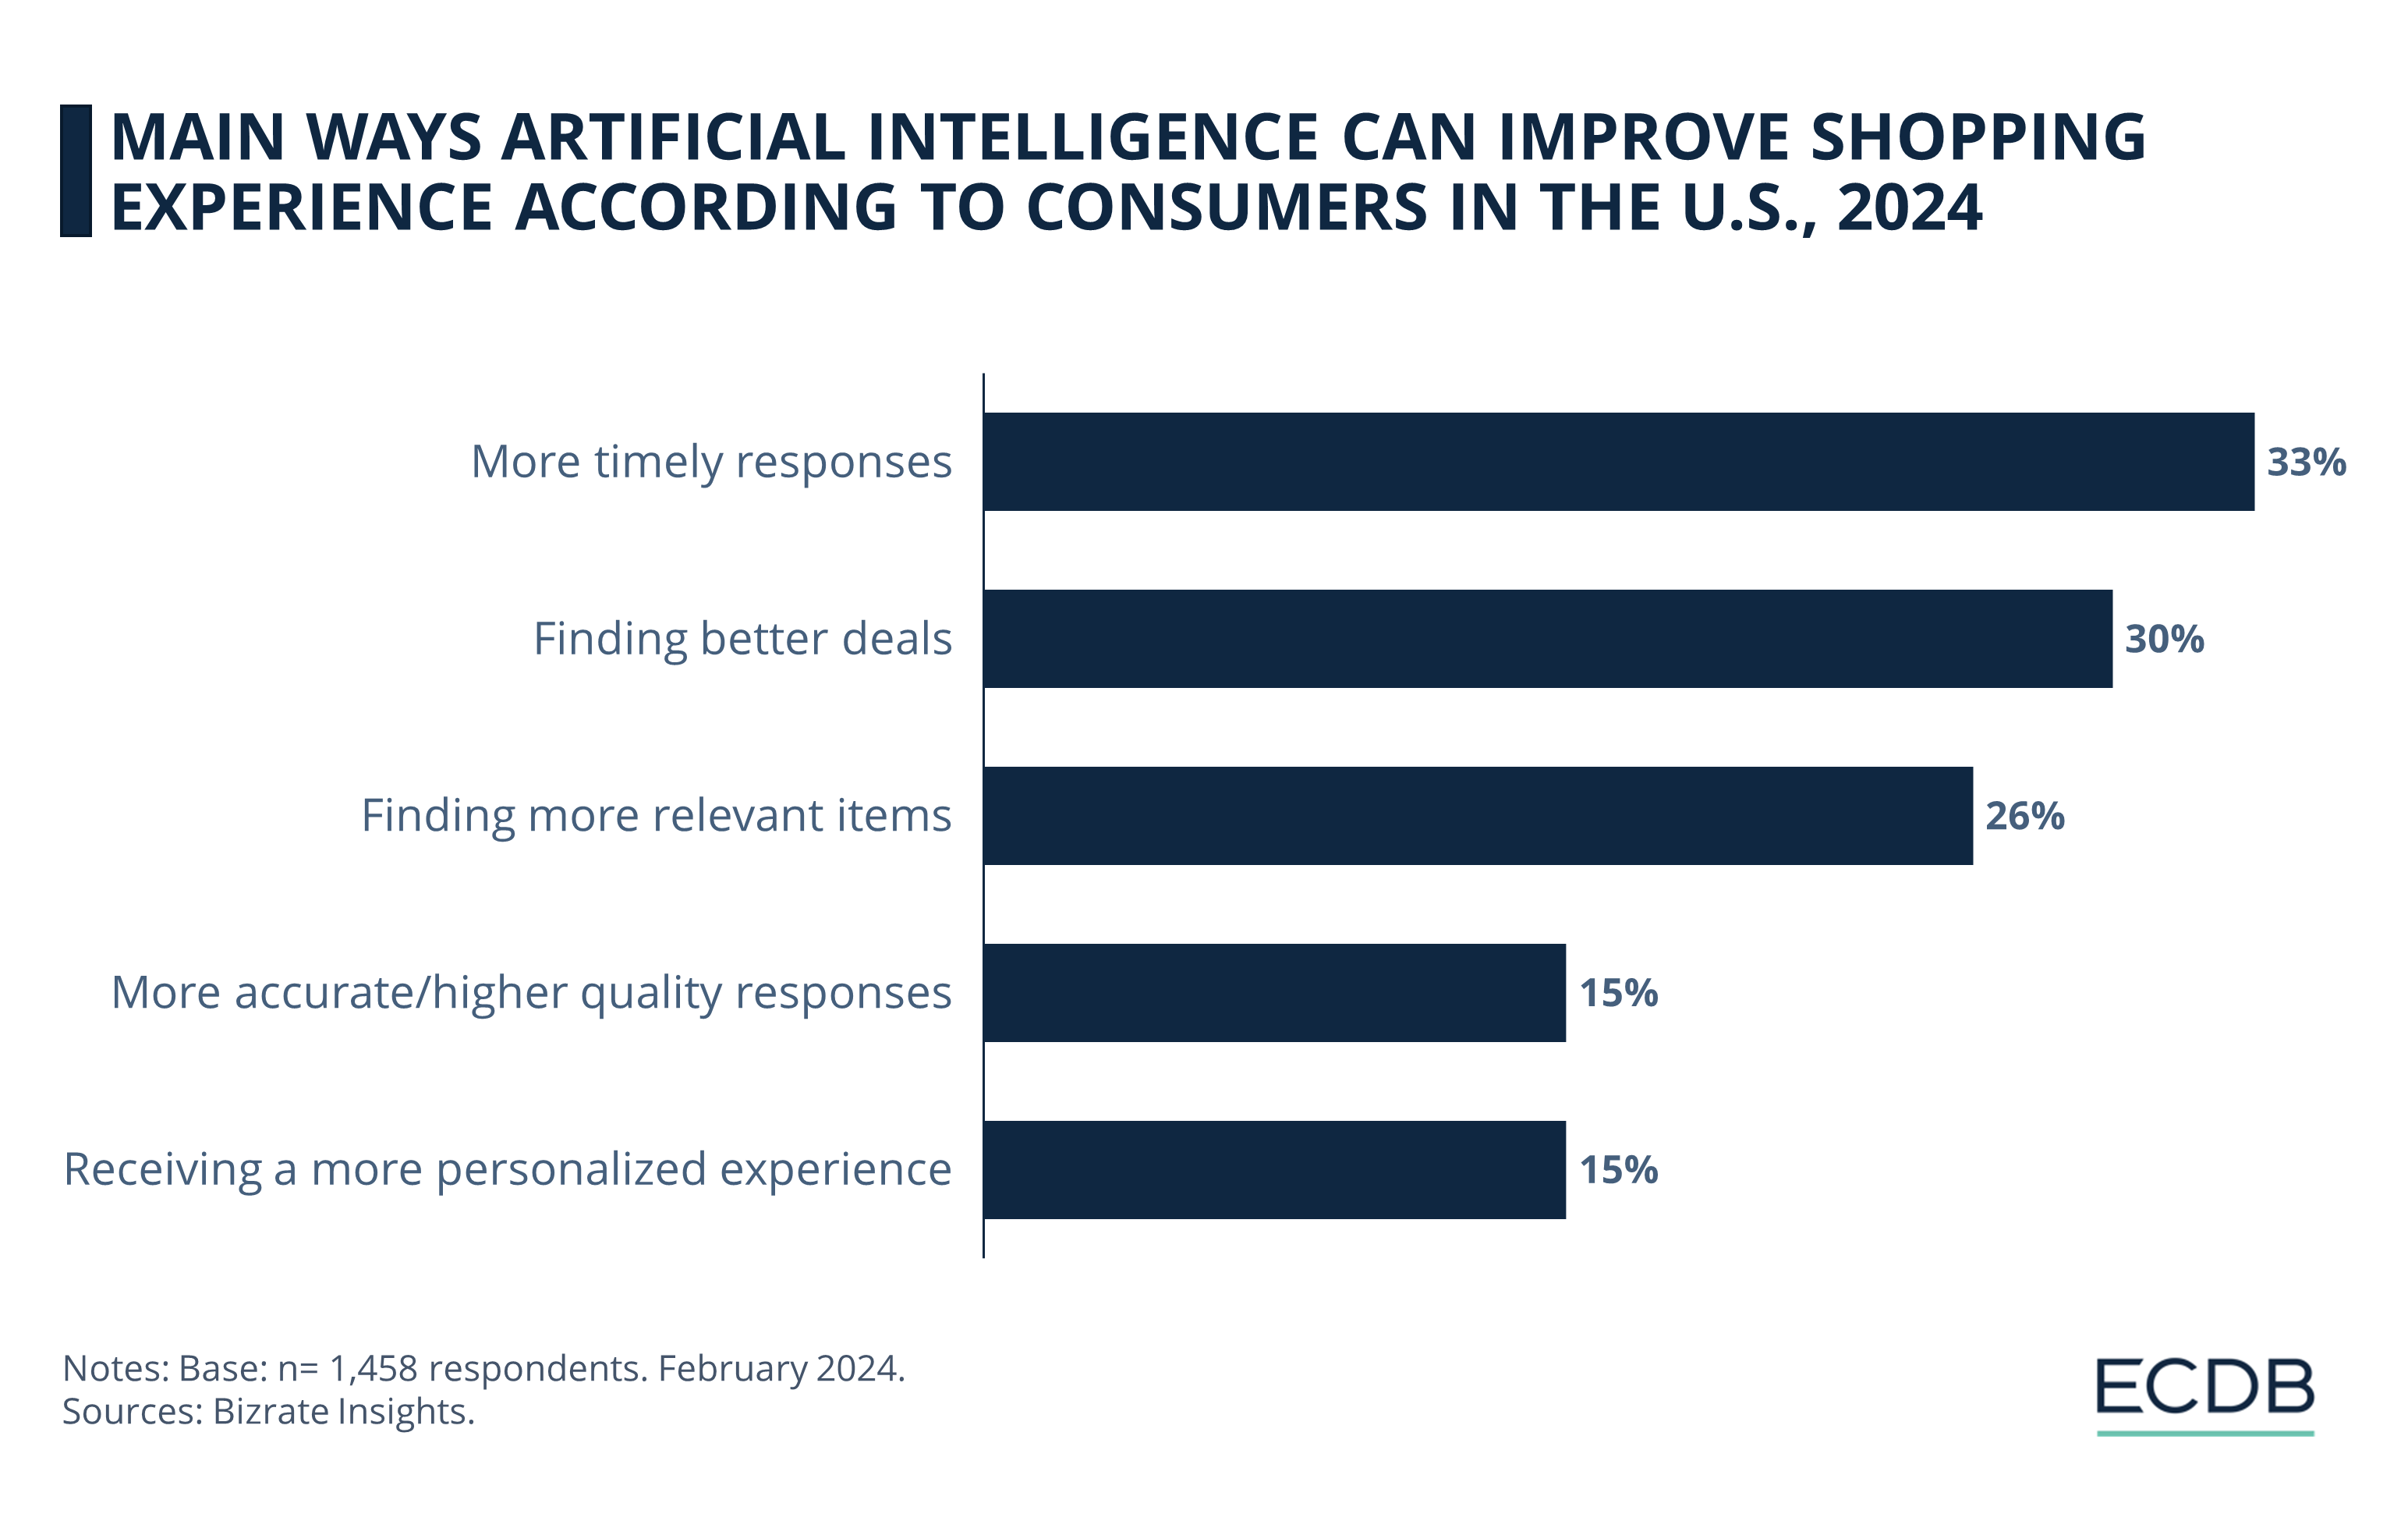 Main Ways Artificial Intelligence Can Improve Shopping Experience According to Consumers in the U.S., 2024